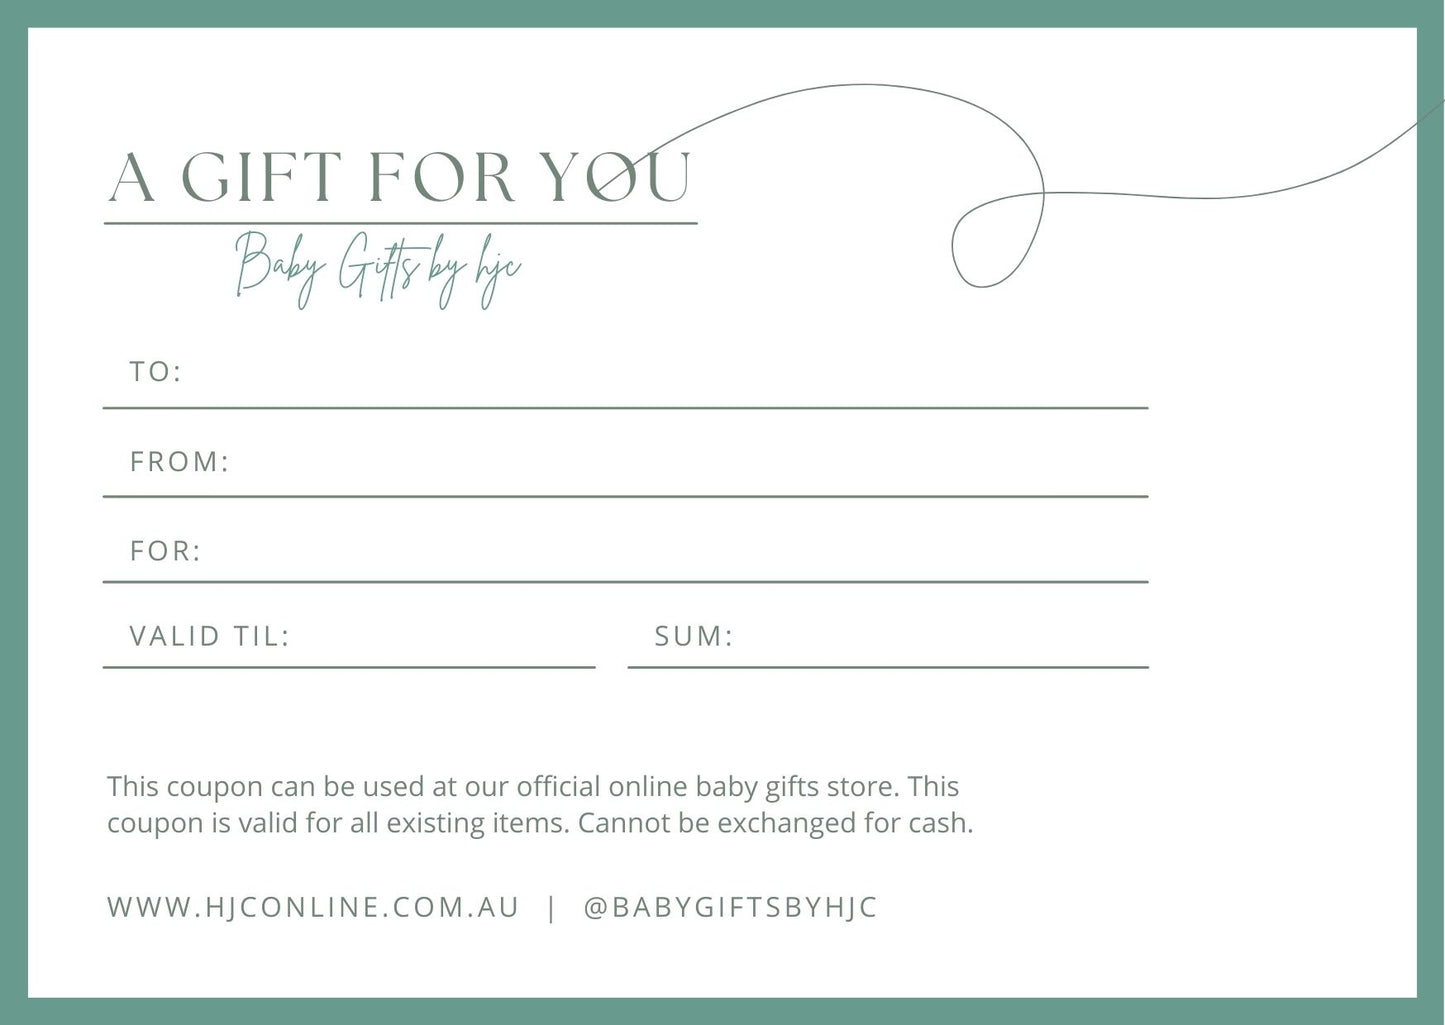 Gift card by HJC